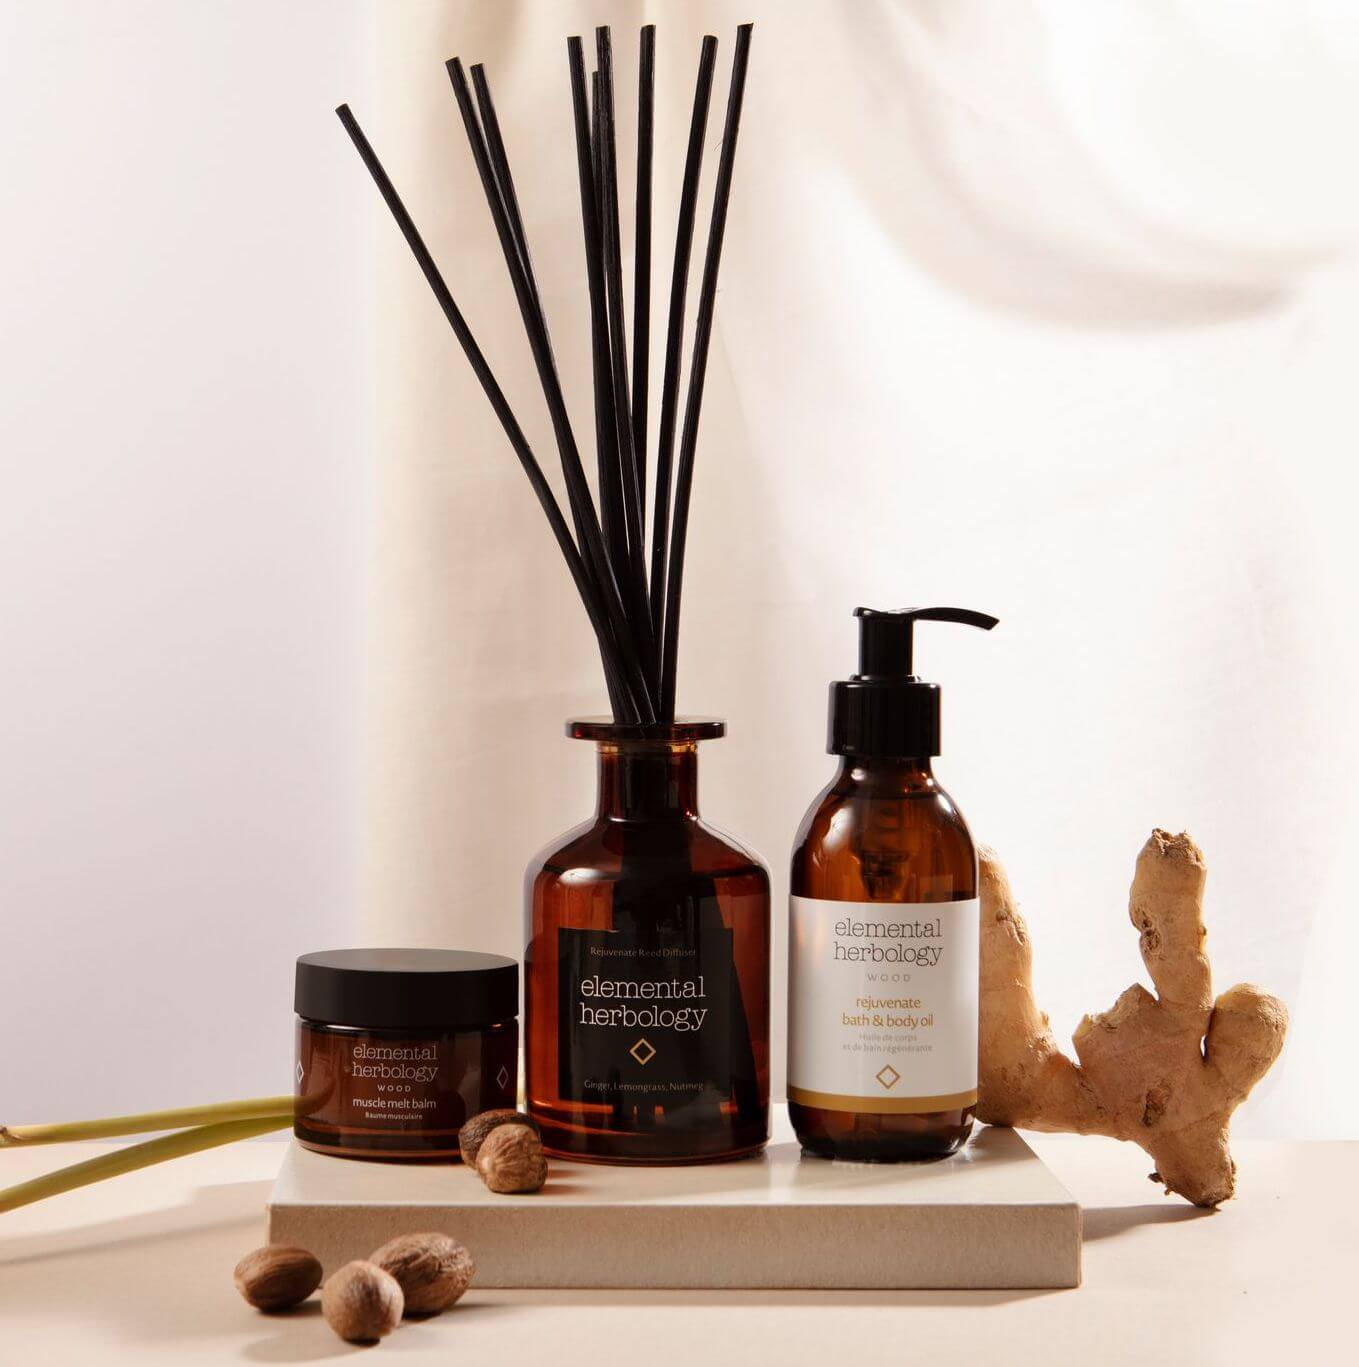 Elemental herbology products - a candle, diffuser and bath and body oil set